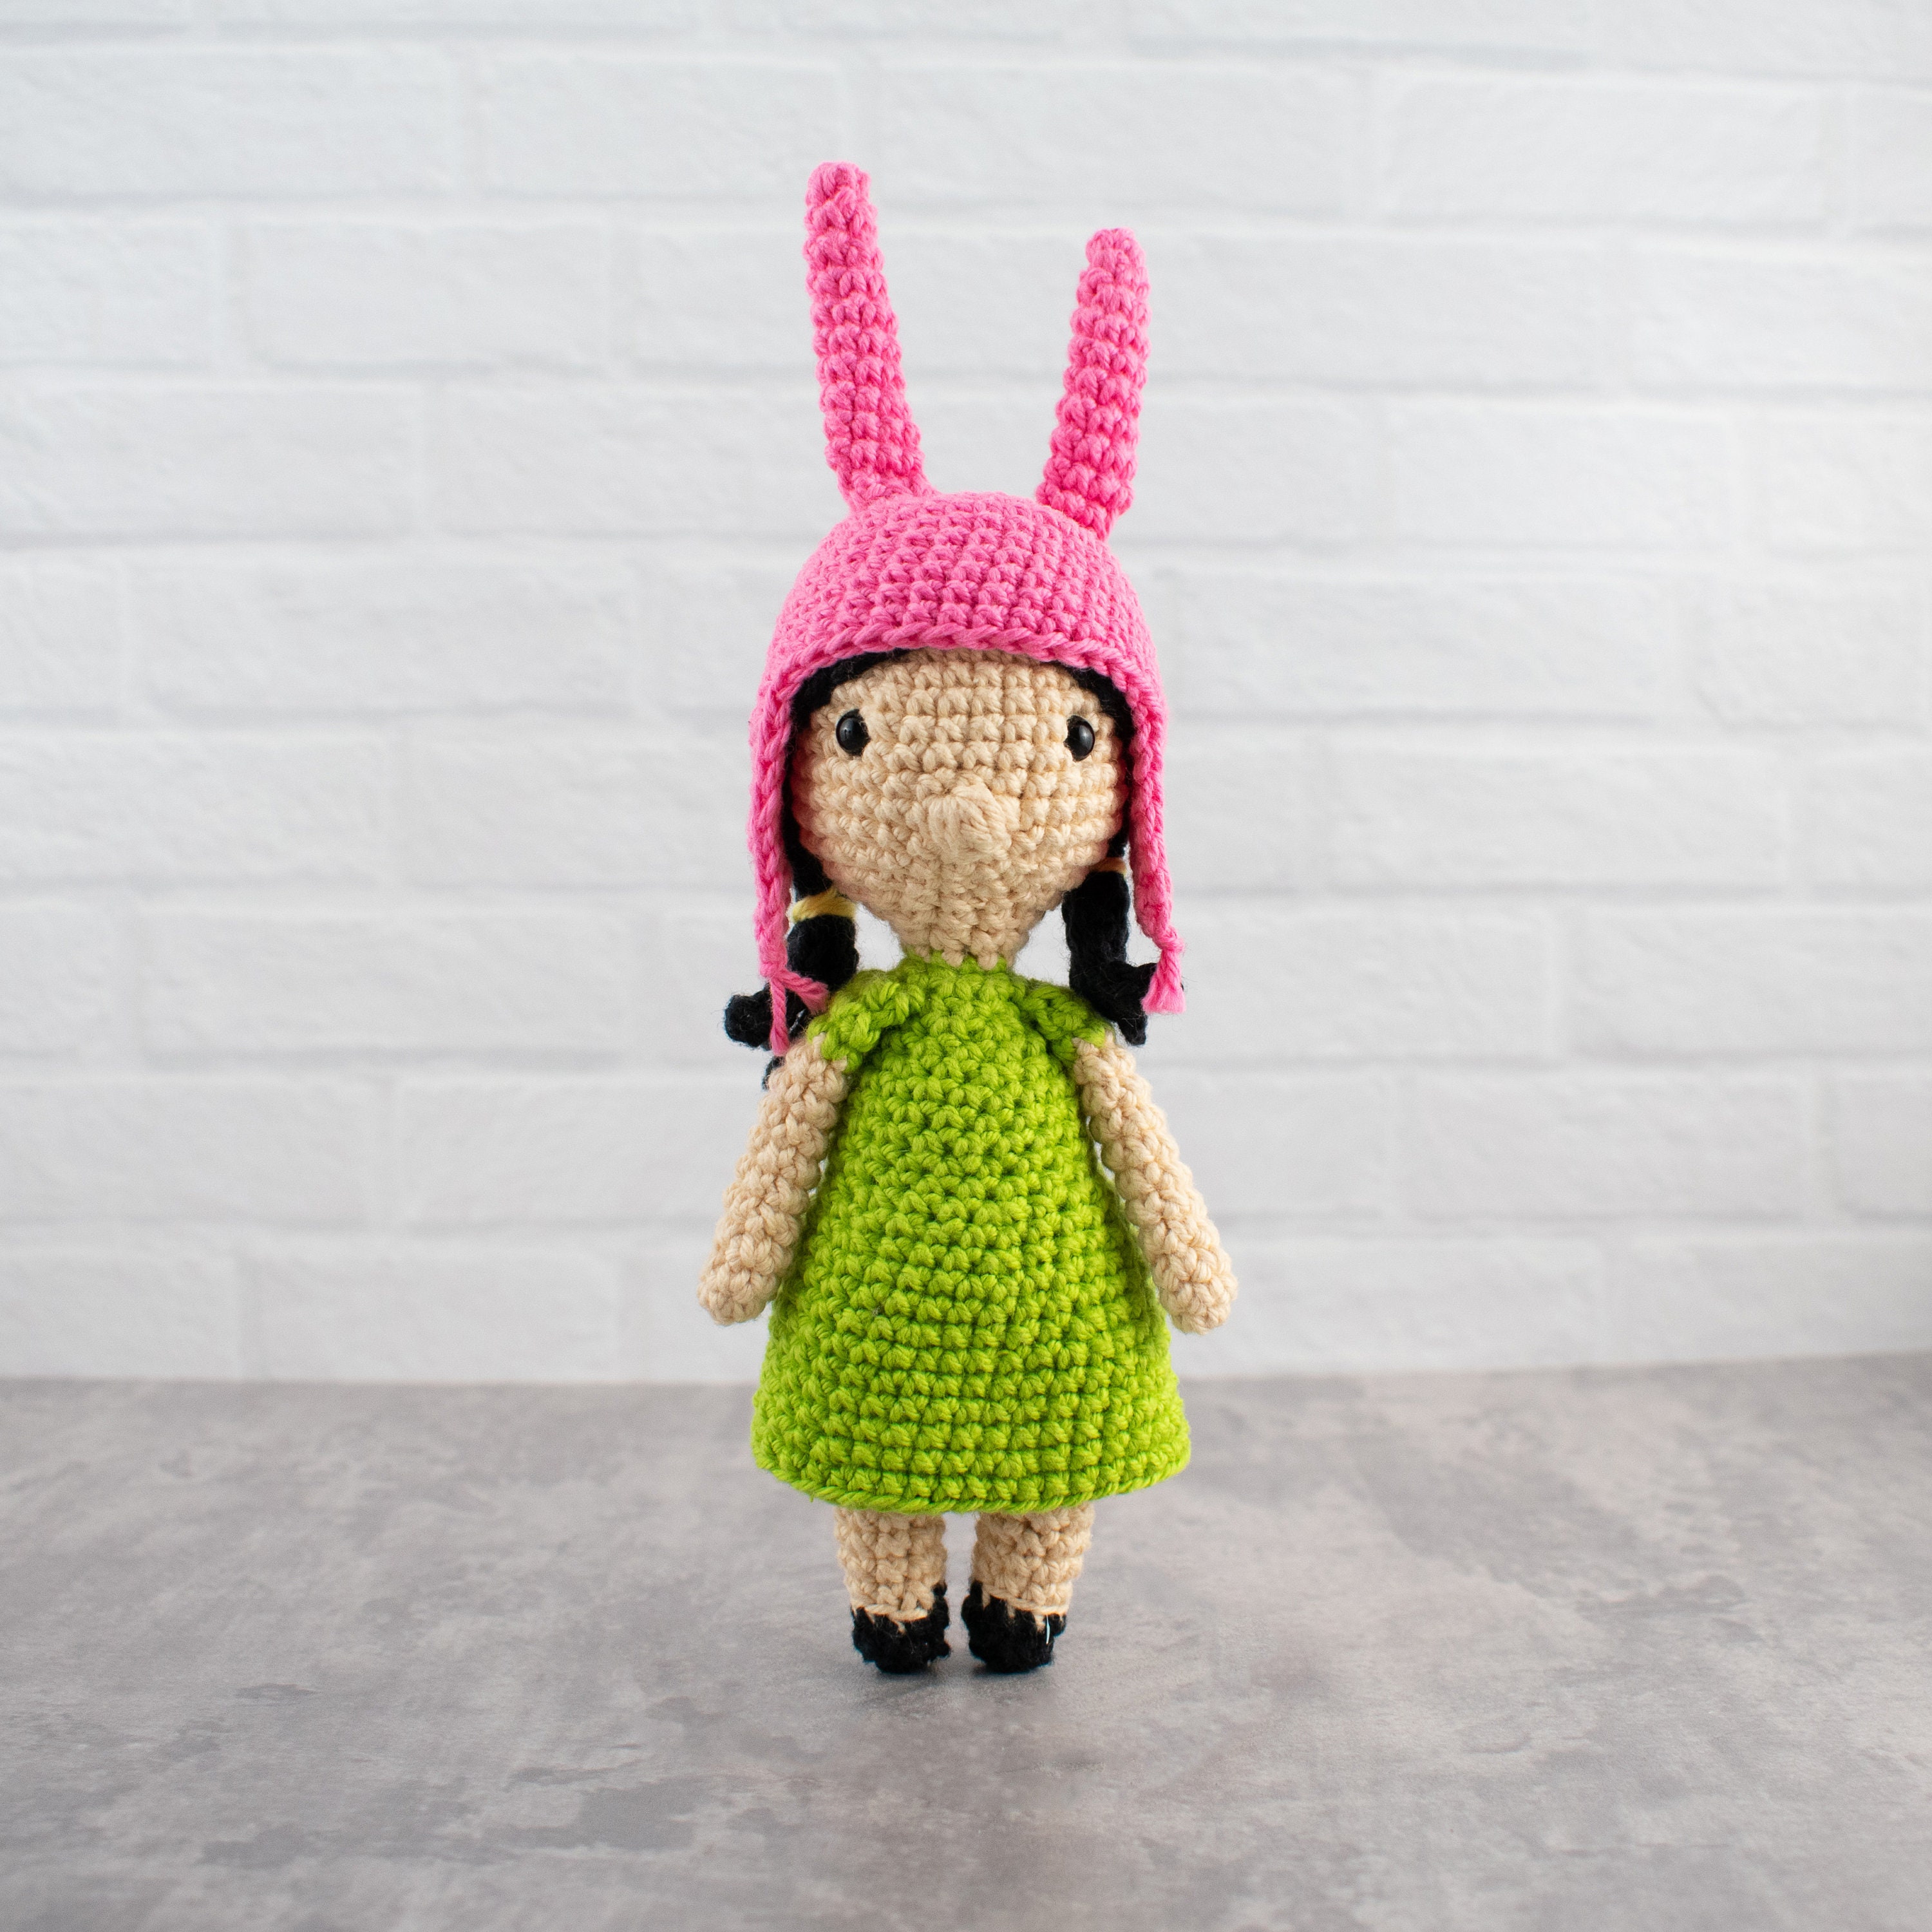 Bob's Burgers Inpired Costume Crochet Outfit Baby Louise 